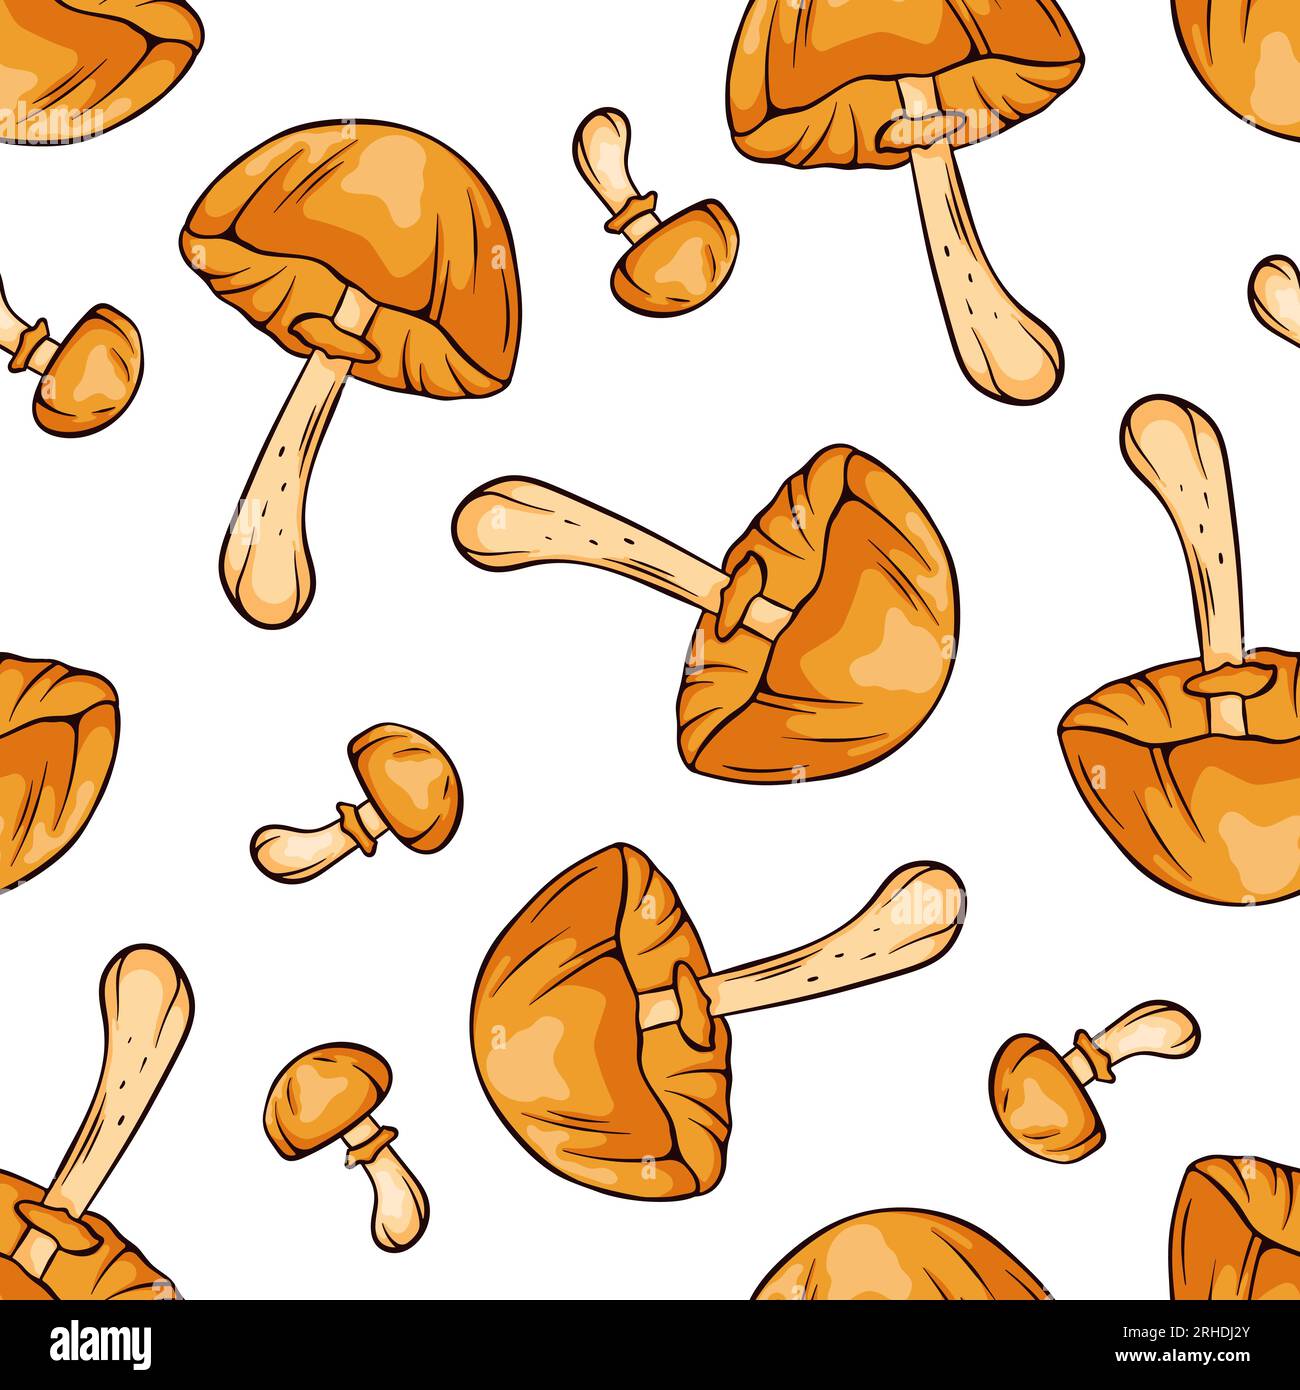 Autumn Skullcap inedible mushrooms seamless pattern in cartoon, line art style. Pattern for wrapping paper, fabric, design. Vector illustration Stock Vector